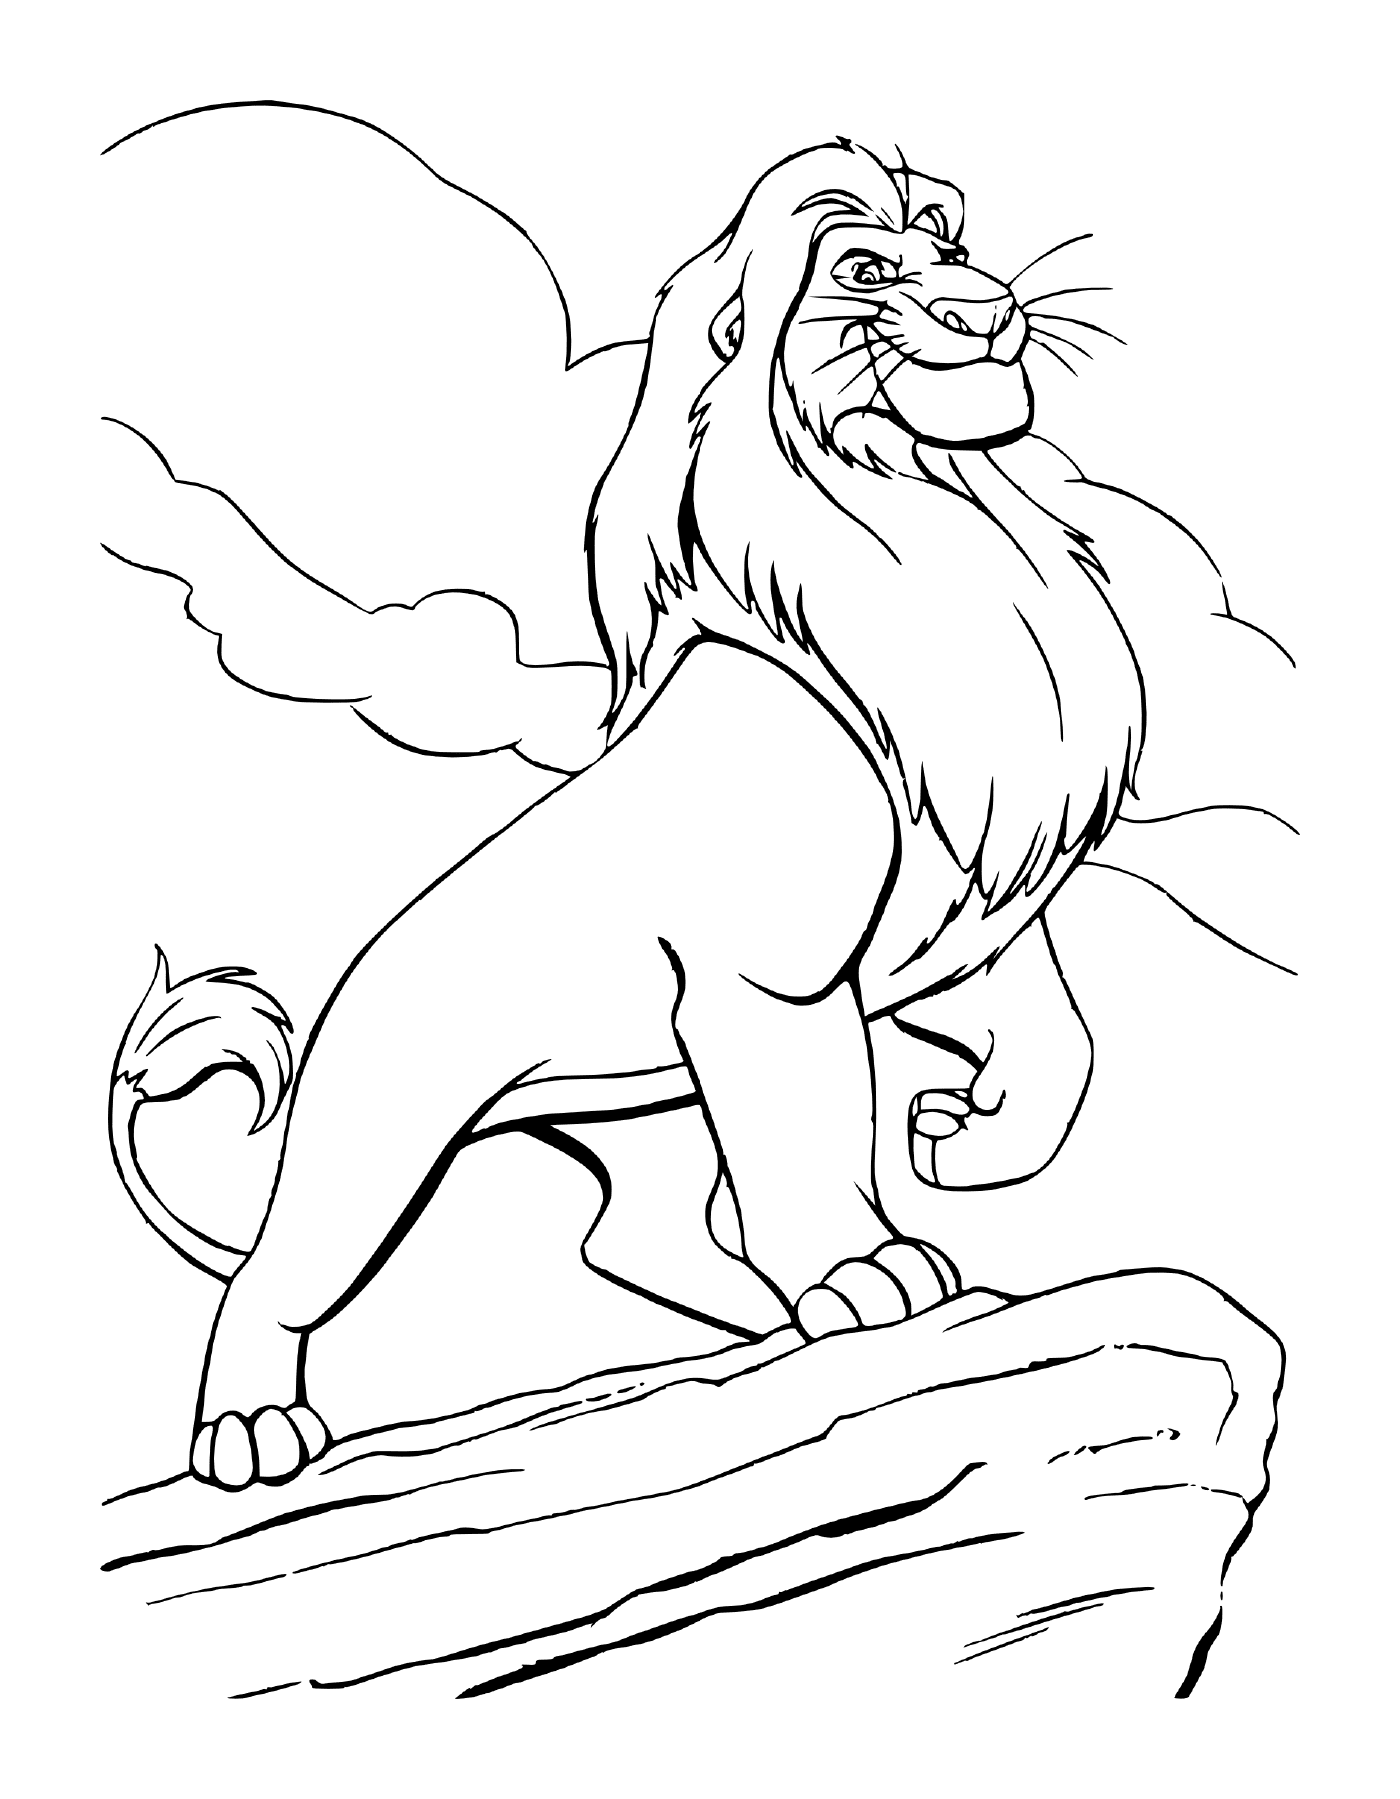  Mufasa from the movie The Lion King 